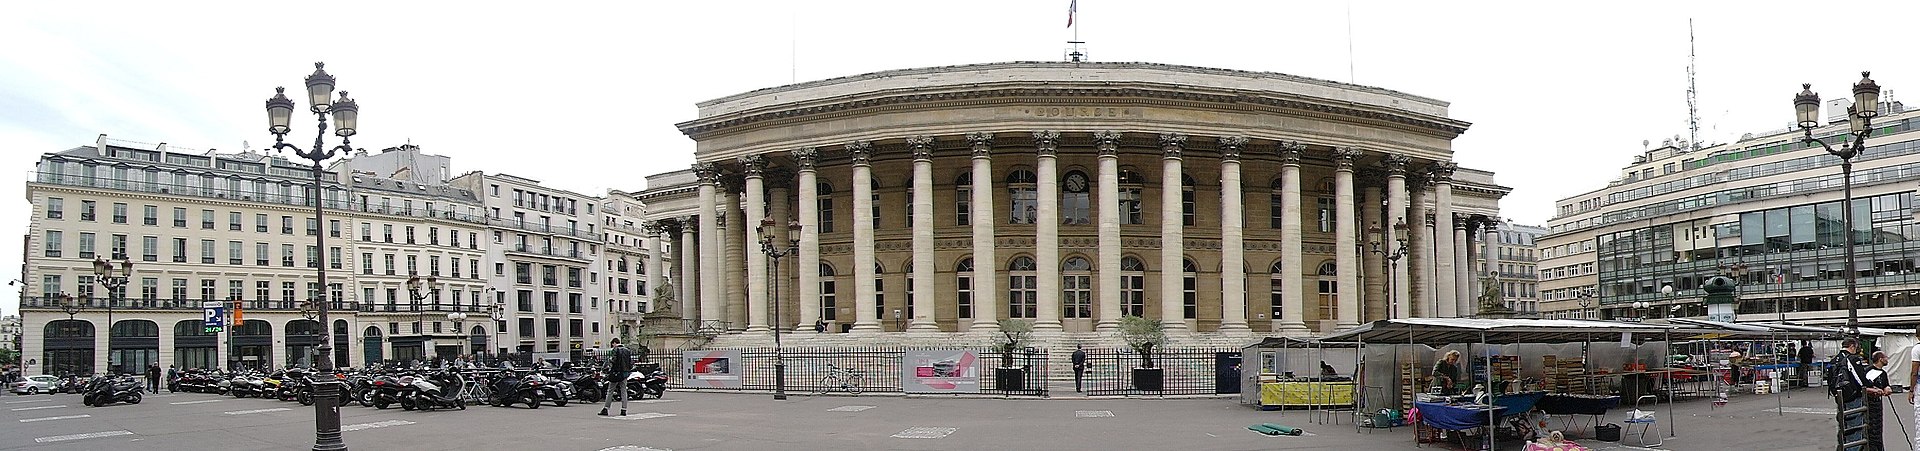 https://upload.wikimedia.org/wikipedia/commons/thumb/1/13/PlacedelaBourse.jpg/1920px-PlacedelaBourse.jpg